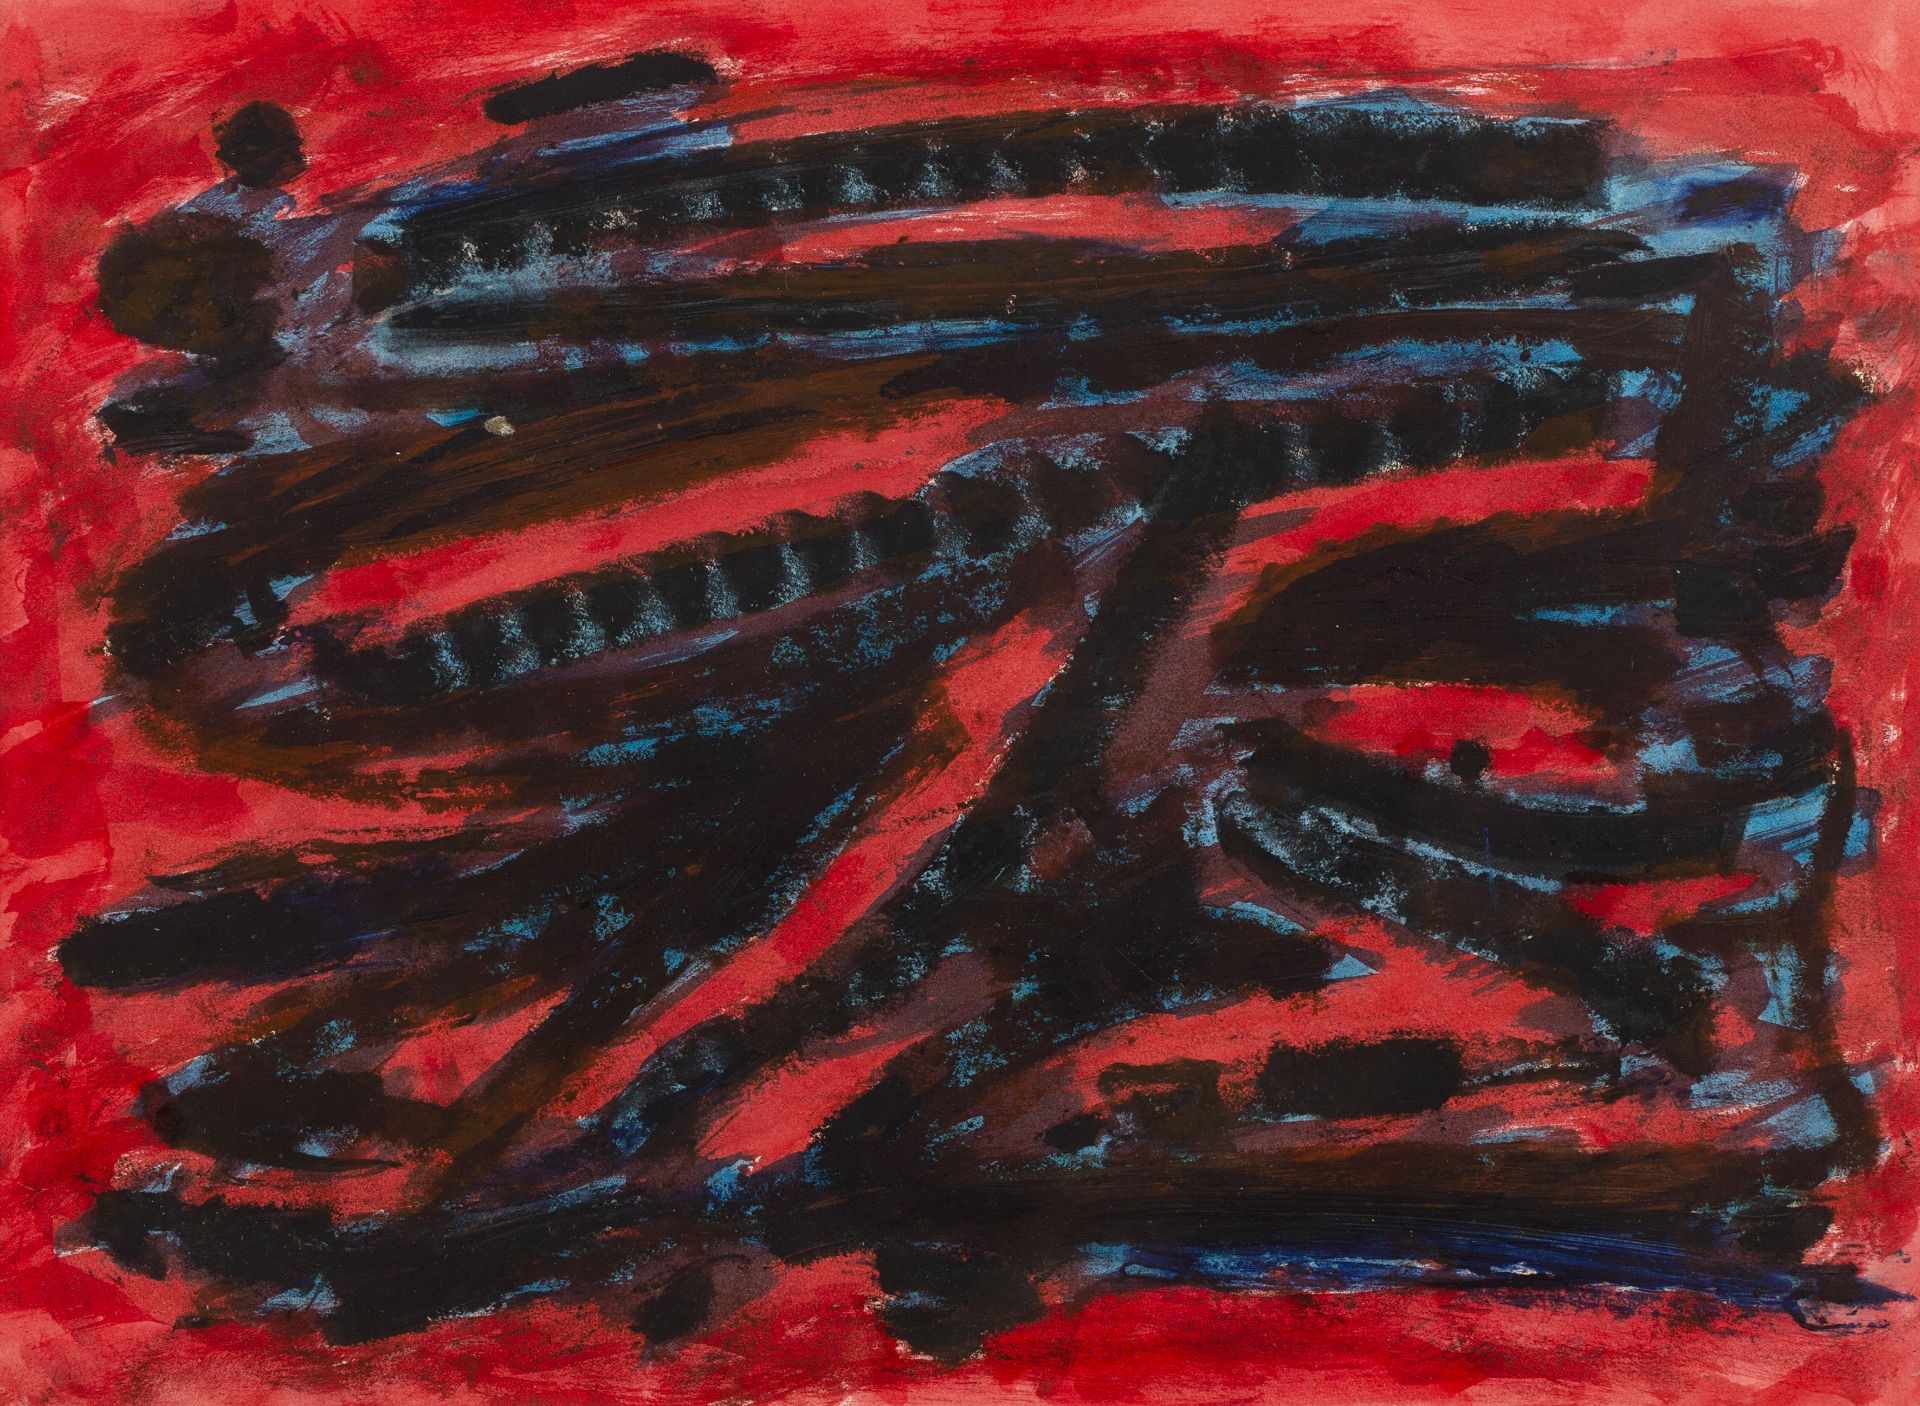 William Gear (1955-1997) 'Untitled', mixed media, signed and dated 1994 lower right, 29.5cm x 40cm